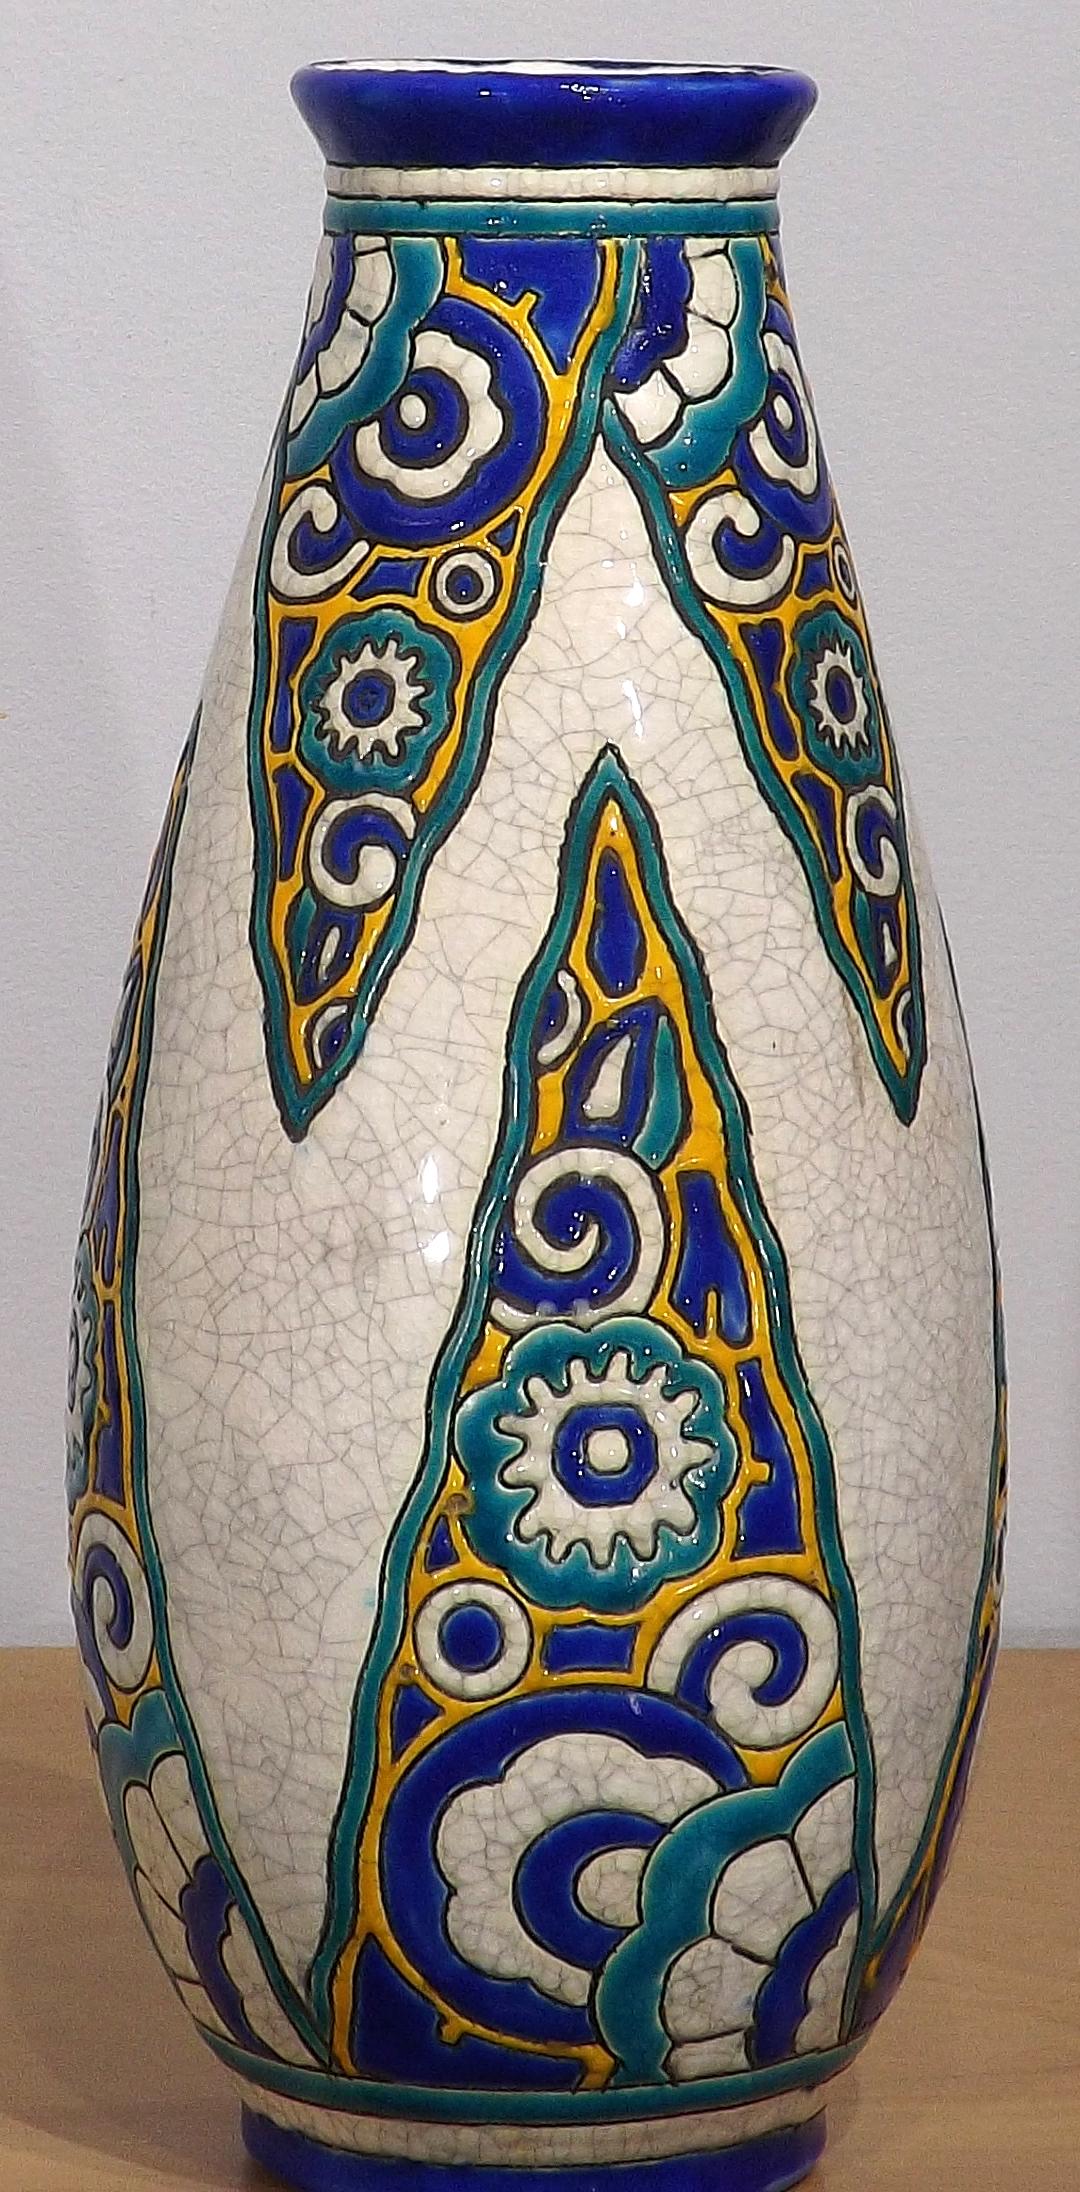 A beautiful hand-painted 12 3/4 inch Boch Freres Keramis vase decorated with abstract designs painted in rich cobalt blues and yellows. The background is the famous white crazing that Boch Freres is known for. Gobs of oozing paint, glossy and wet